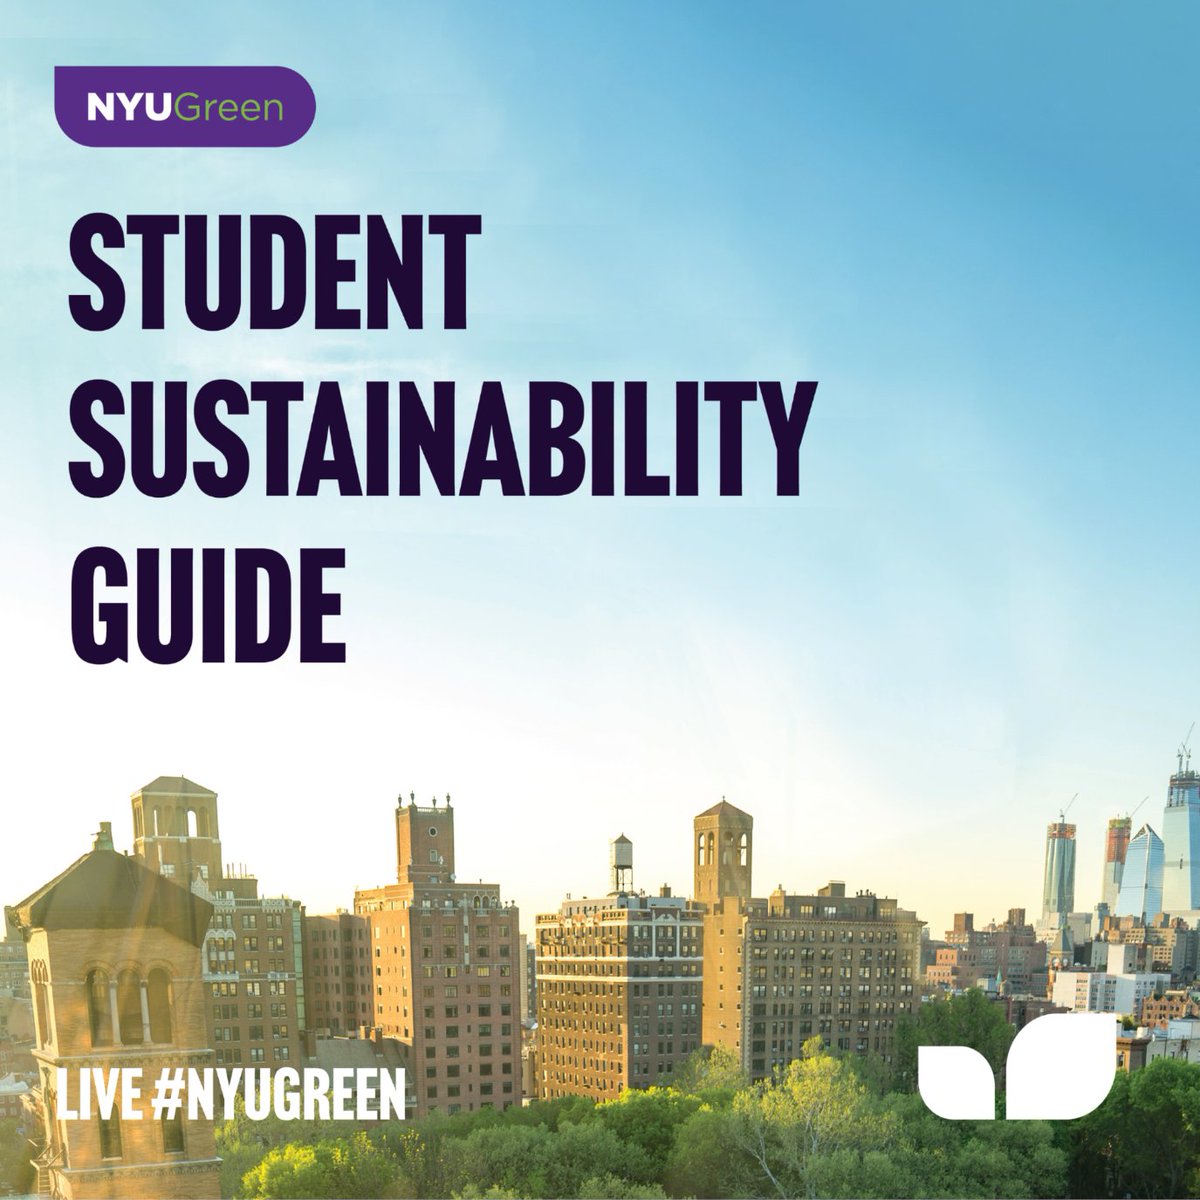 October is #CampusSustainabilityMonth—read NYU's Climate Action Plan, attend a Green Zone training, and consult detailed sustainability guides for students, faculty, and administrators/staff 🌱: nyu.edu/life/sustainab…